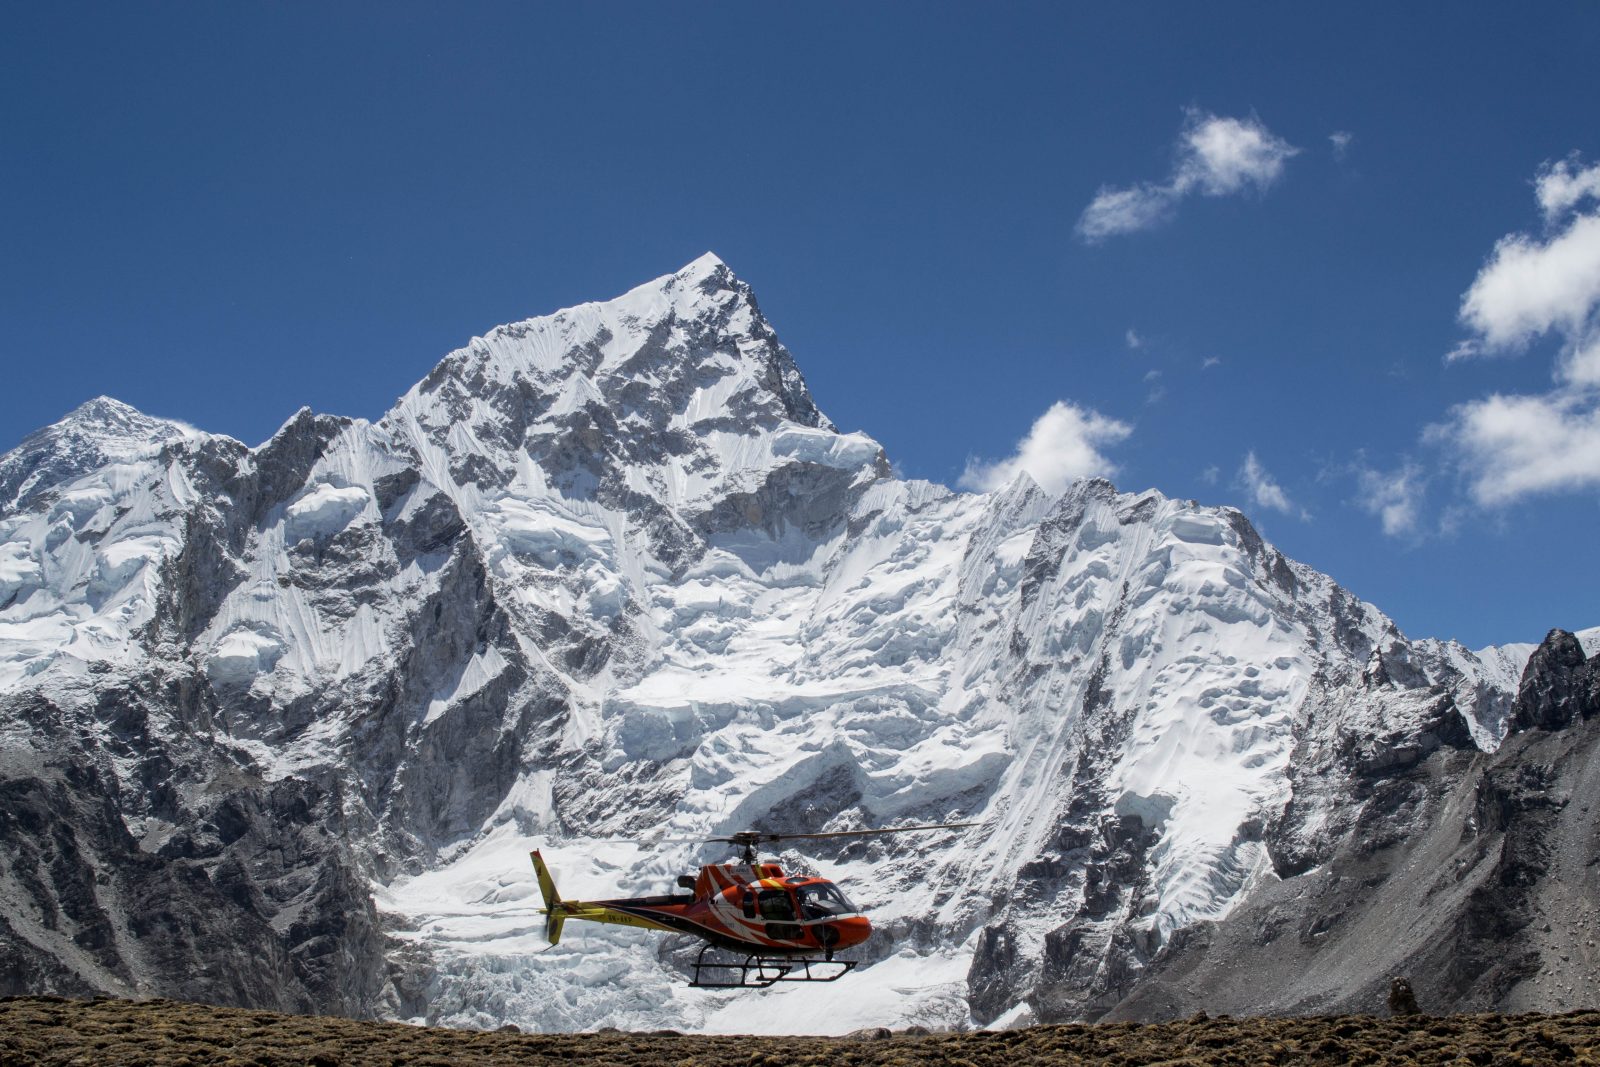 A helicopter leaving Everest Base Camp